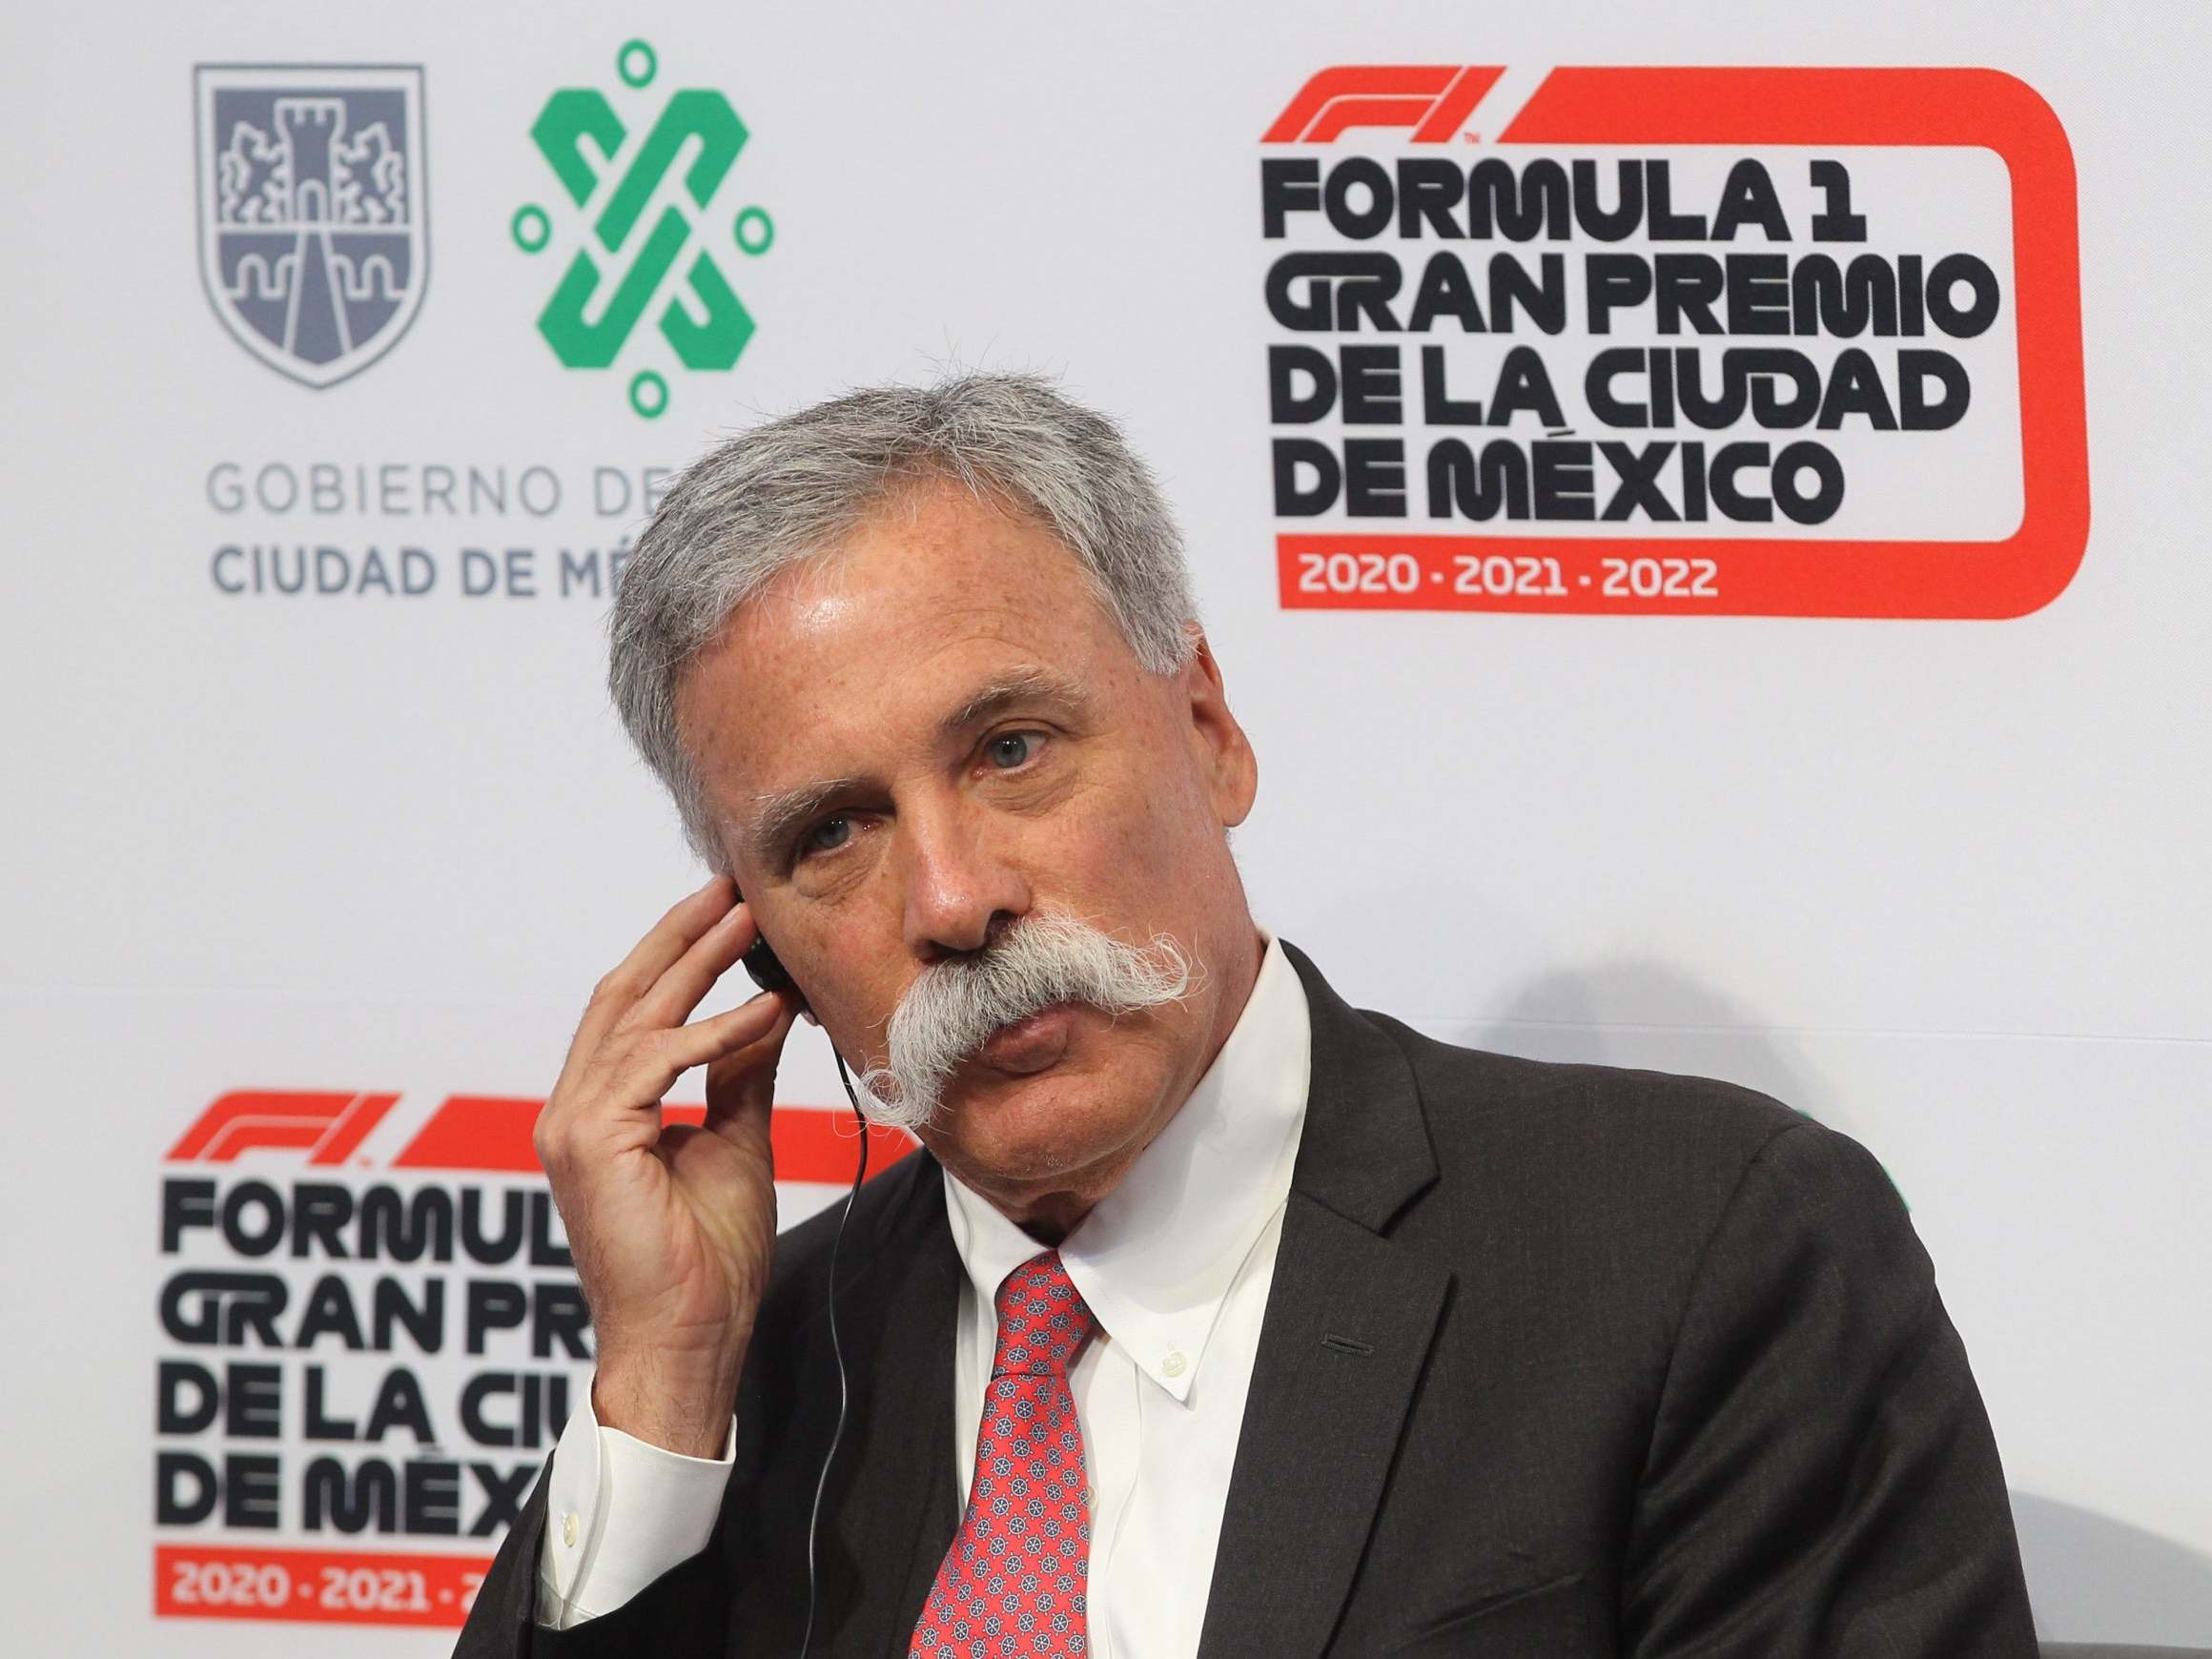 Chase Carey plans to expand the F1 calendar to as many as 24 Grands Prix